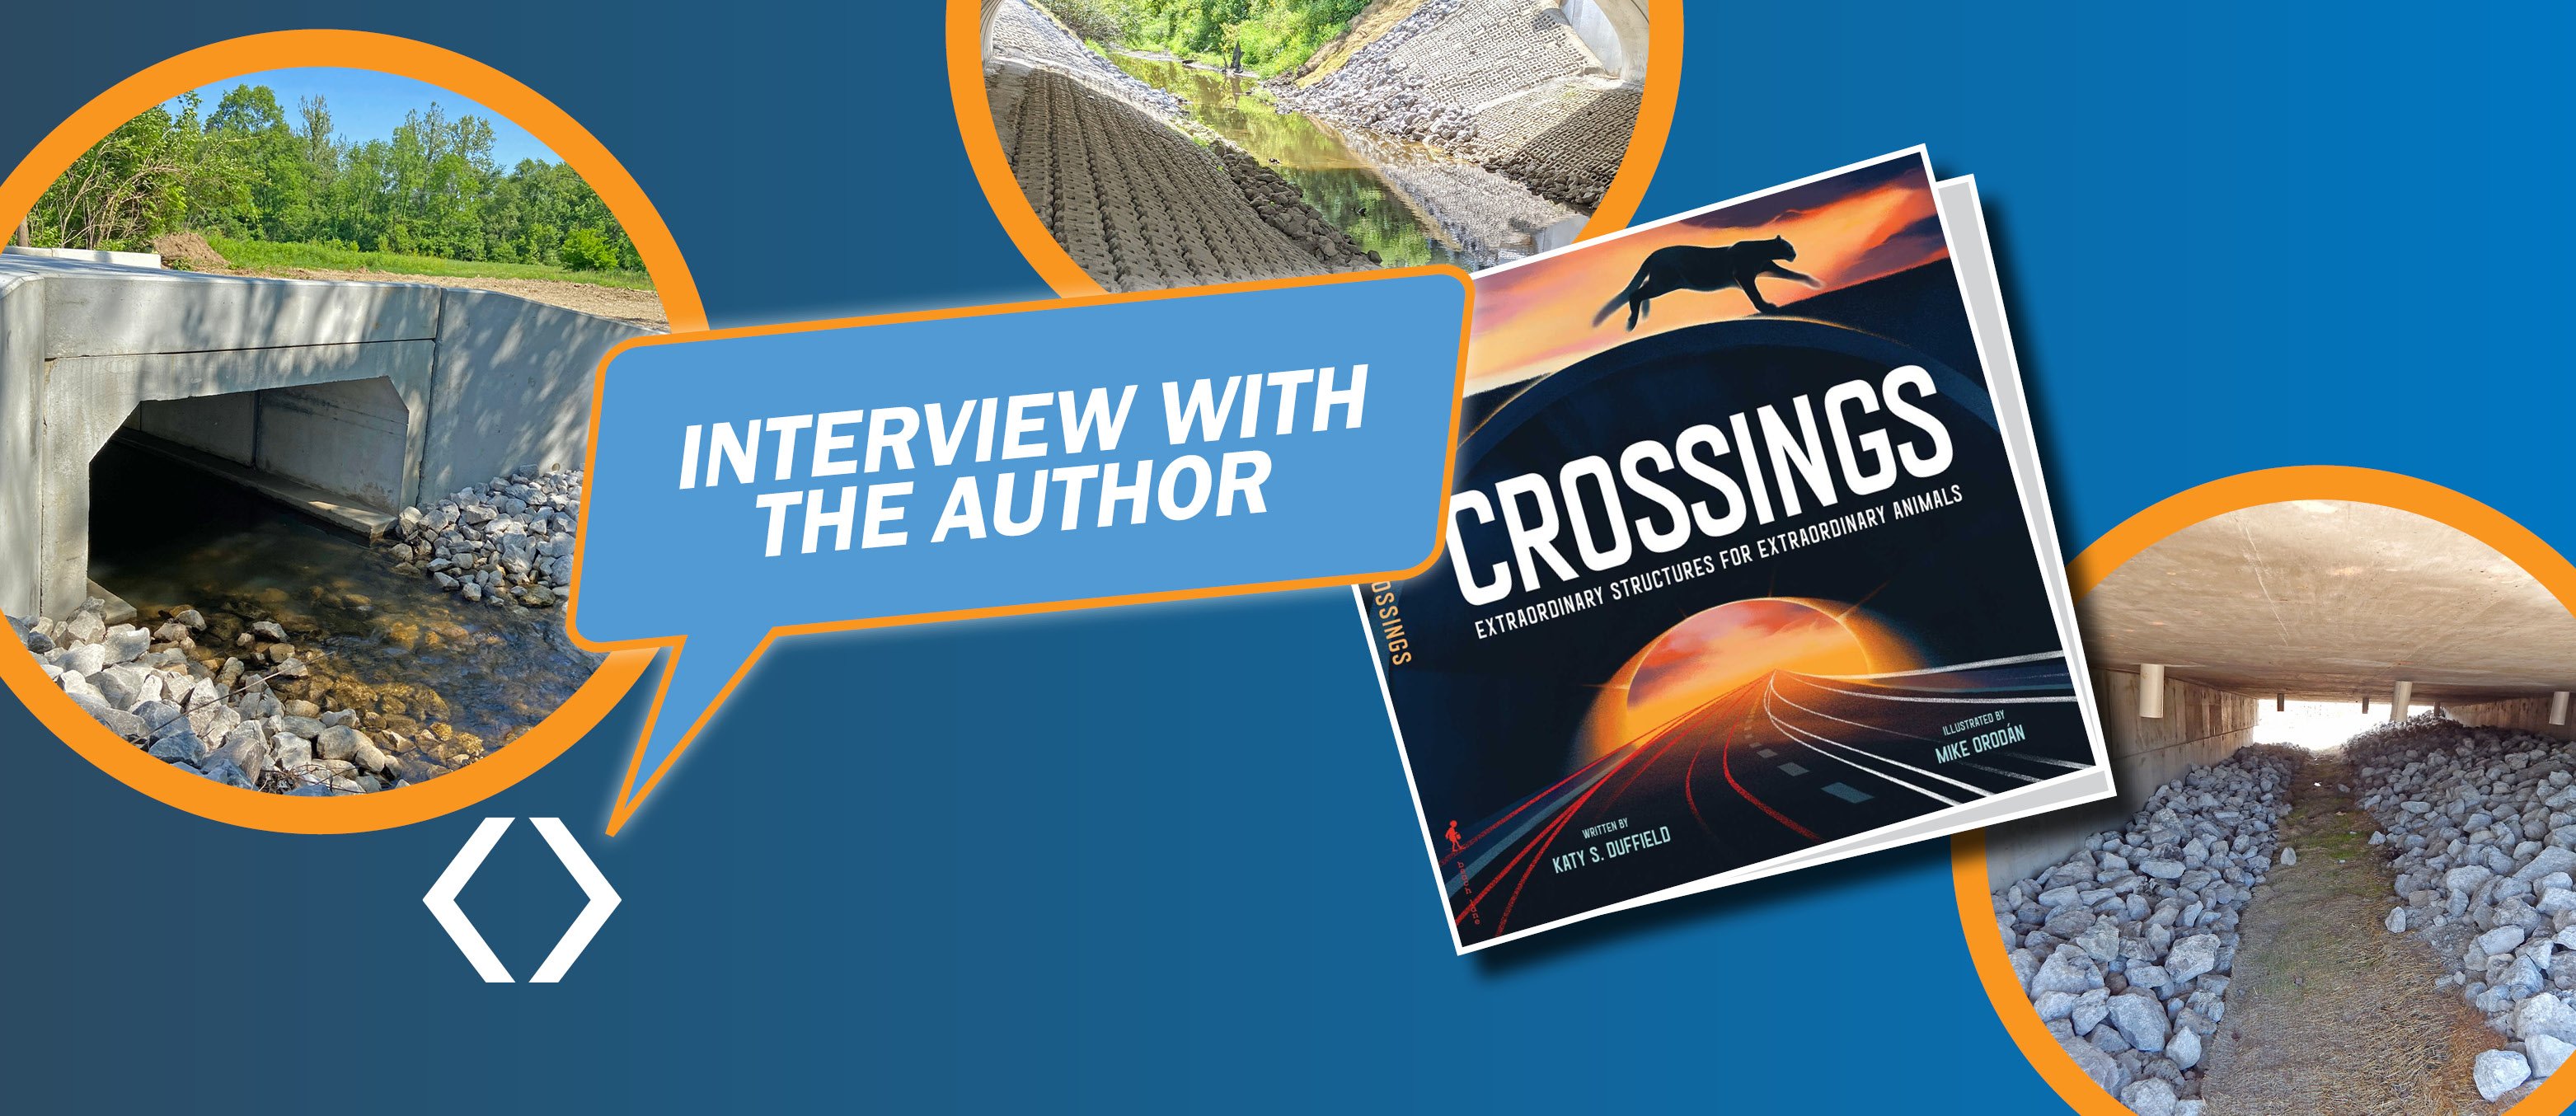 Interview with Katy Duffield: Author of Crossings